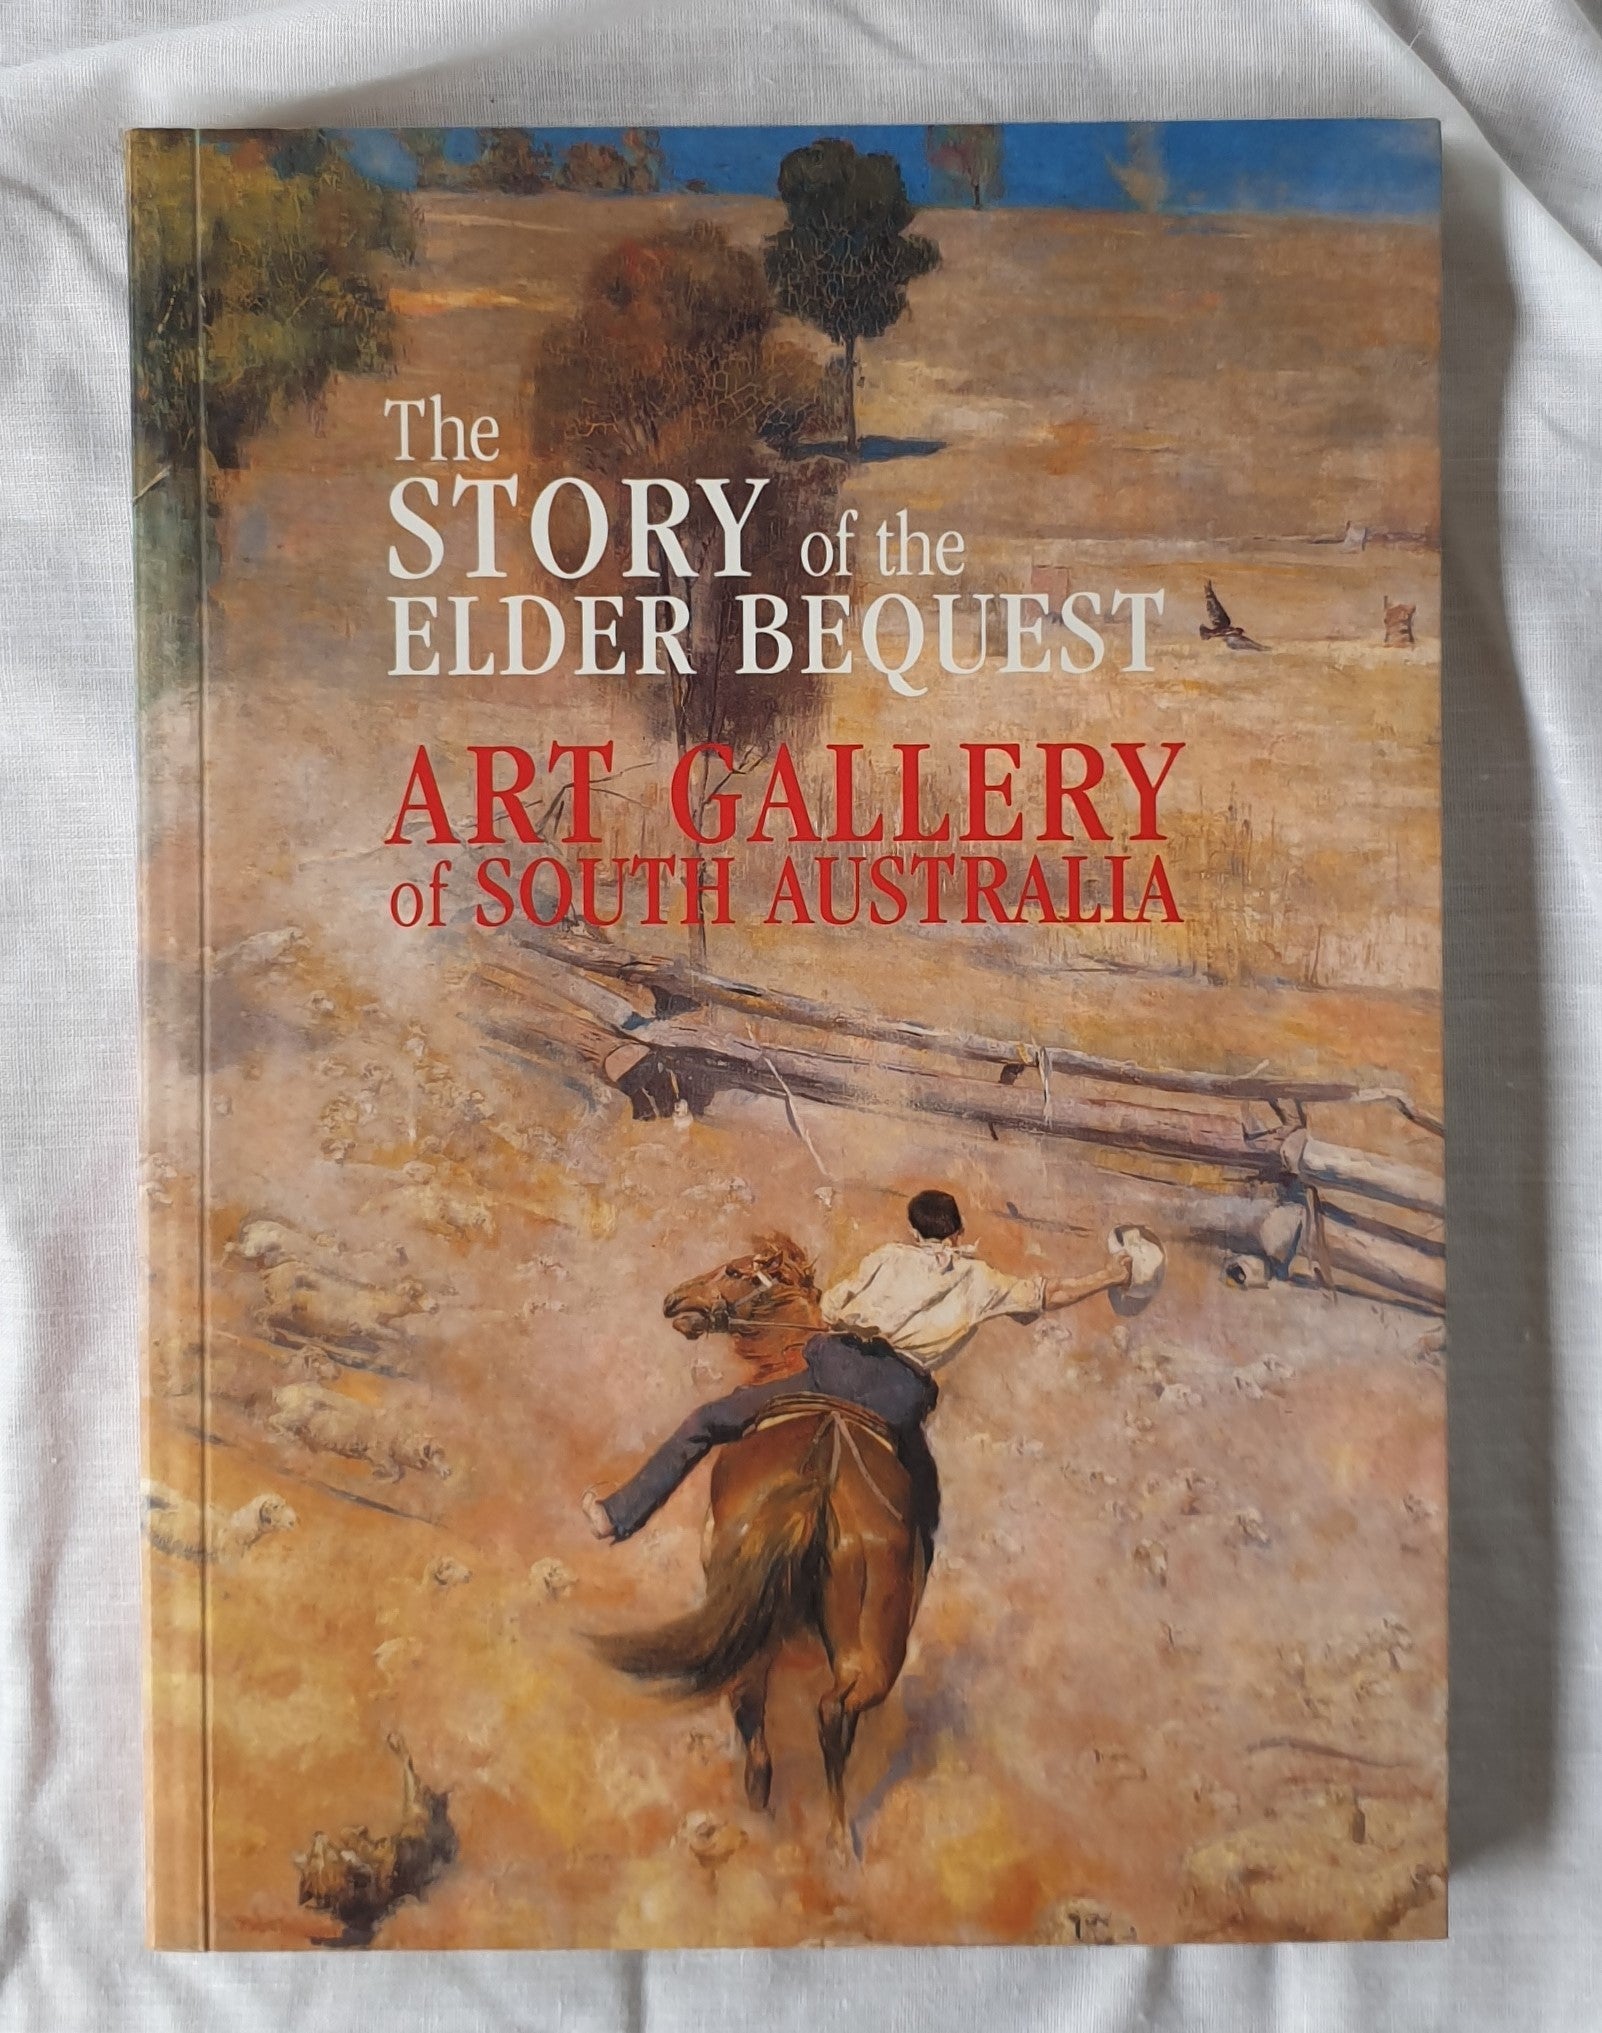 The Story of the Elder Bequest  Art Gallery of South Australia  by Ron Radford, Fayette Gosse, Angus Trumble, Jane Hylton, Christopher Menz, Sarah Thomas